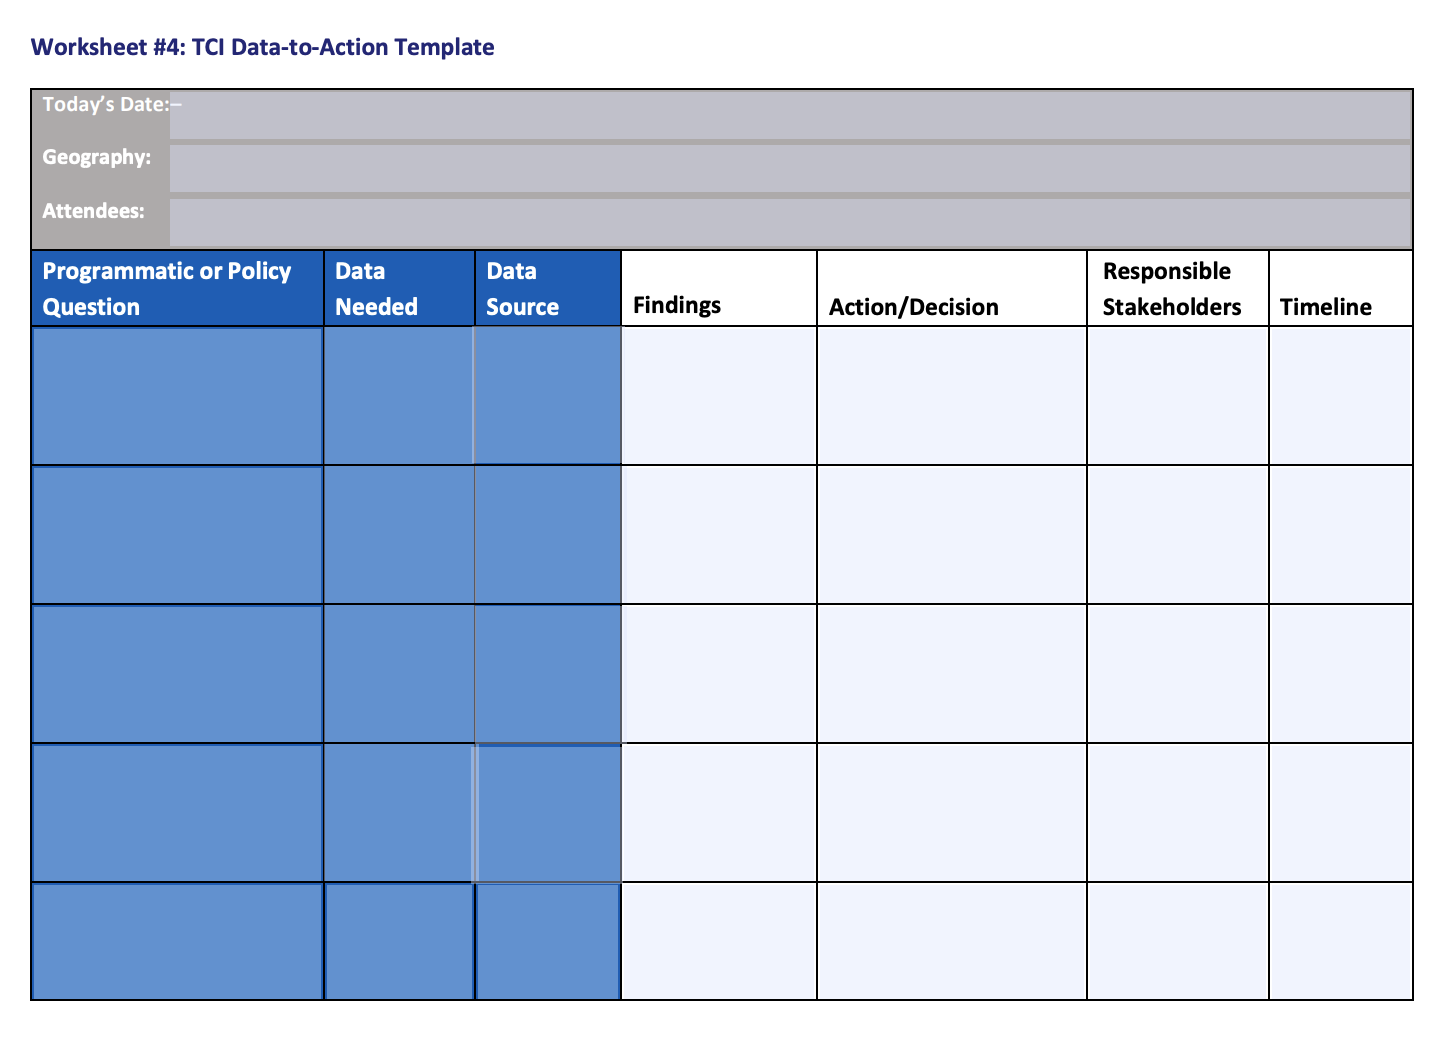 Worksheet #4: TCI Data-to-Action Template